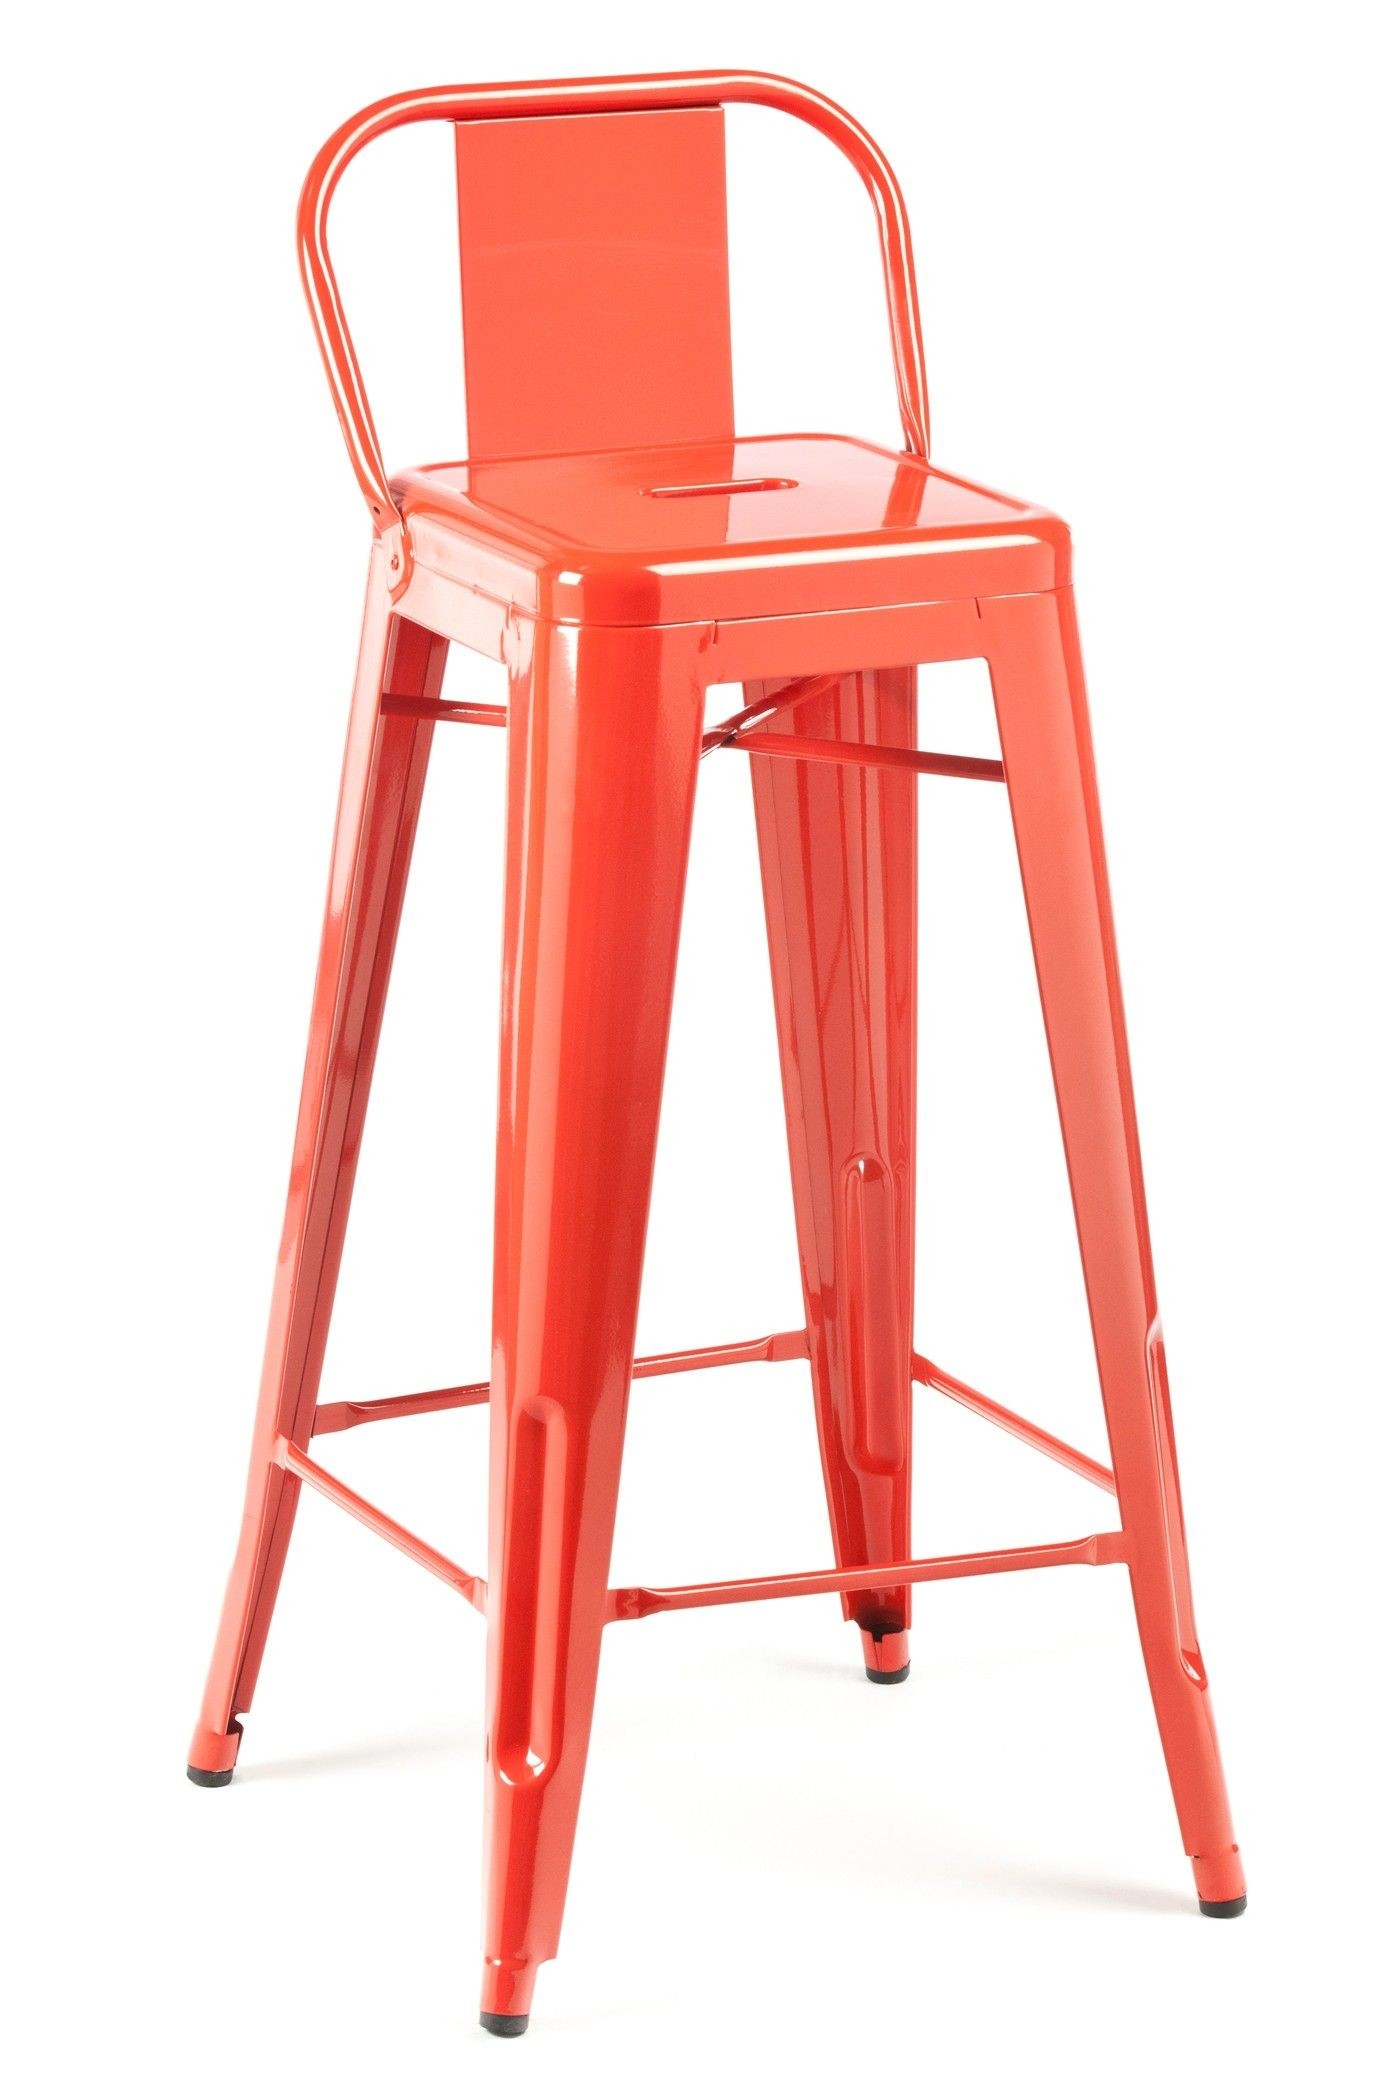 Bar stools with low backs